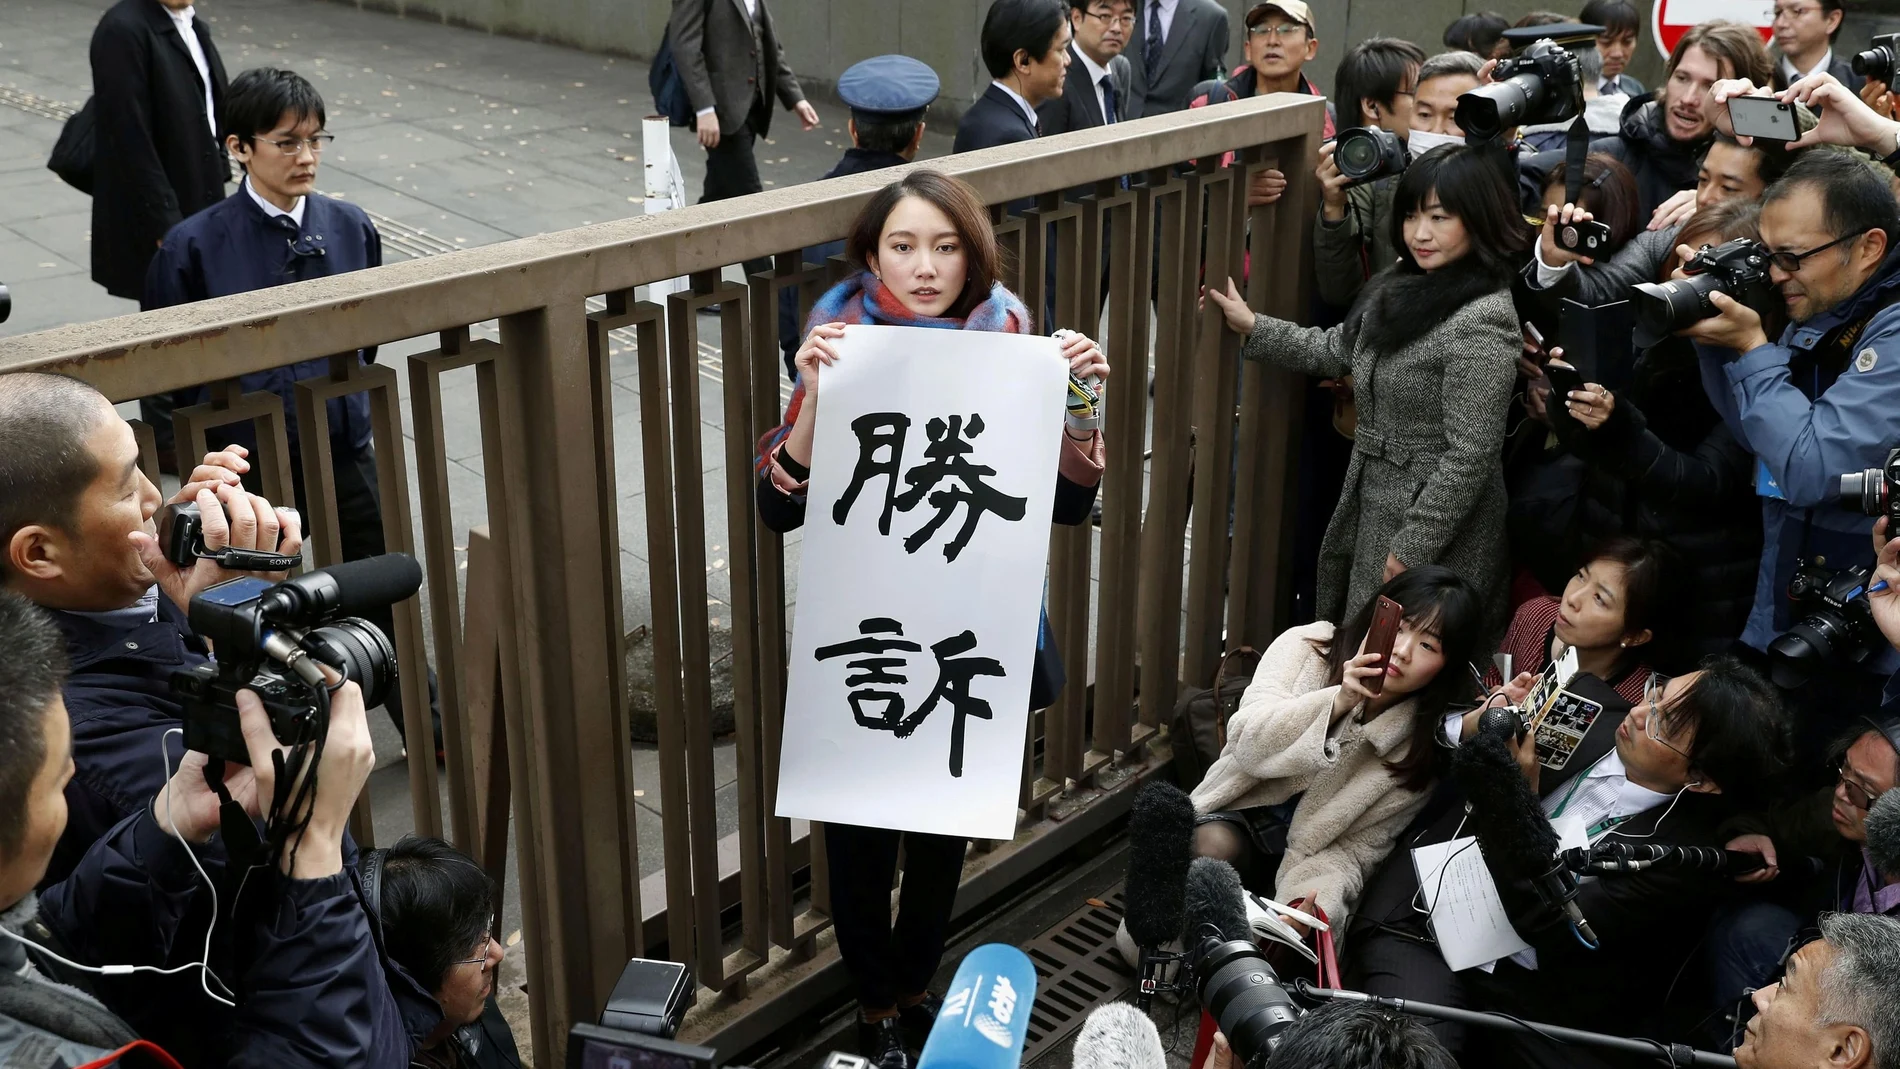 Japanese journalist Shiori Ito holds a banner reading "Victory" outside the Tokyo District Court after a court verdict in Tokyo